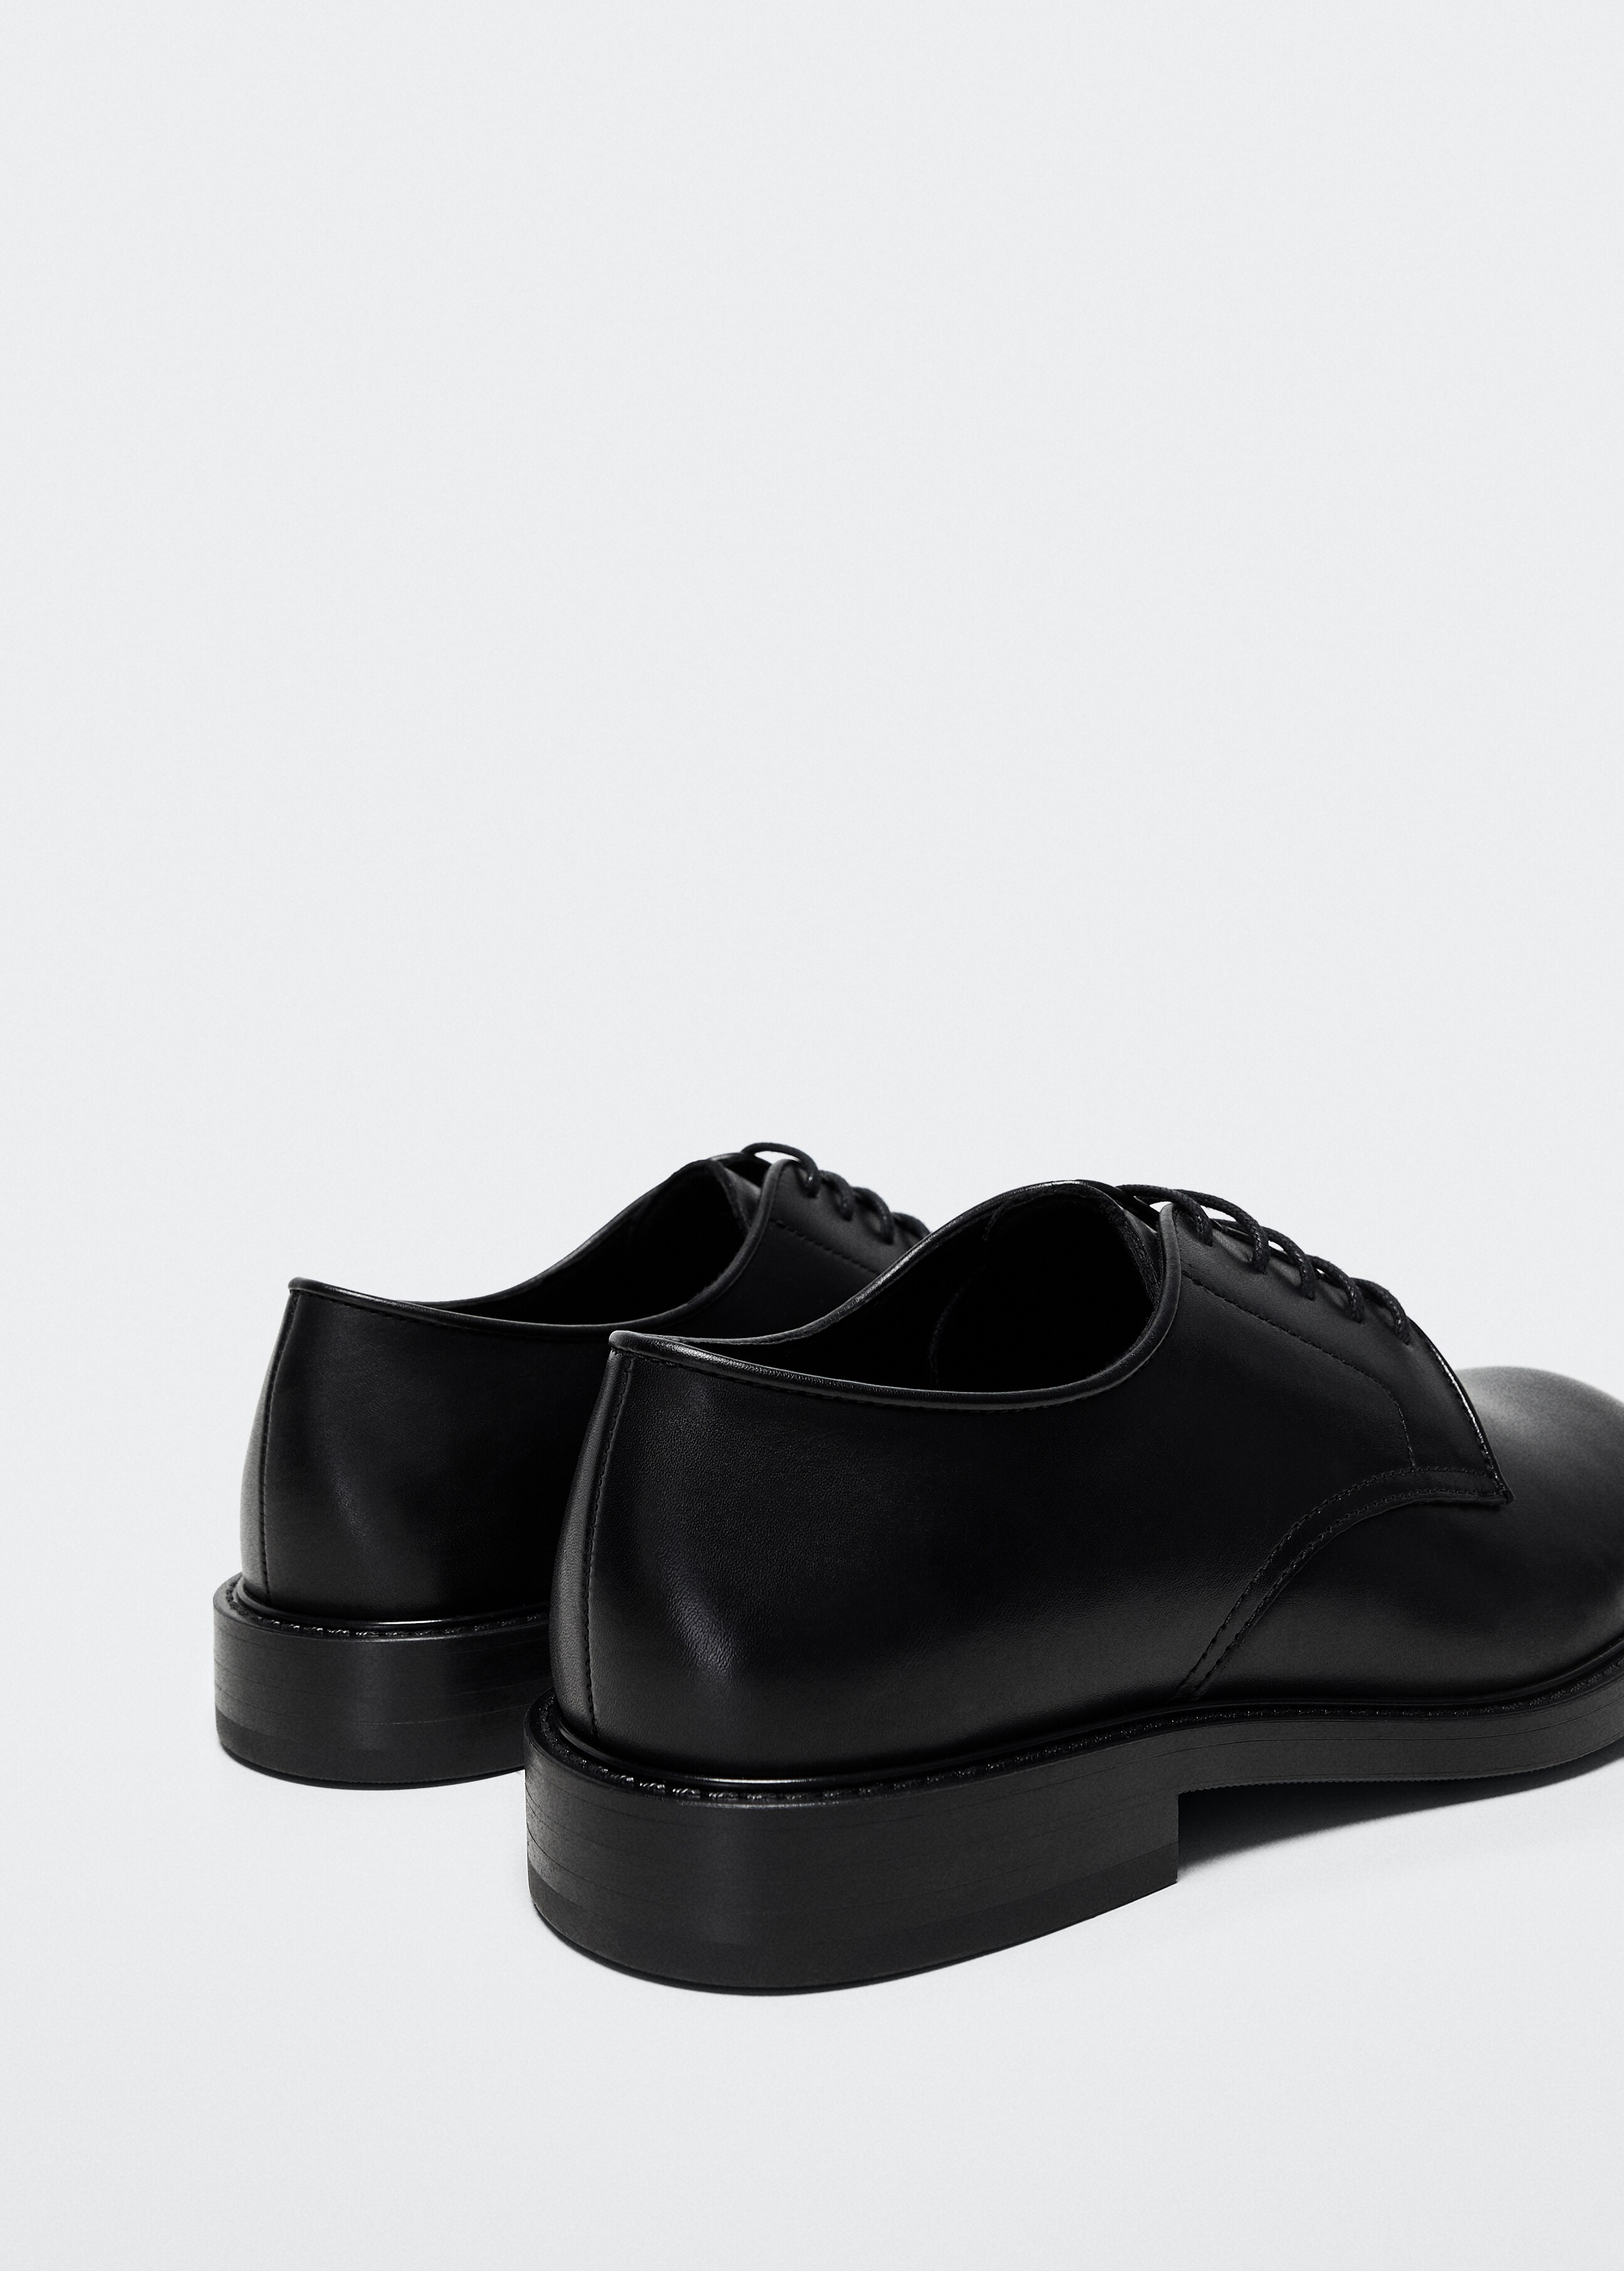 Leather suit shoes - Details of the article 1